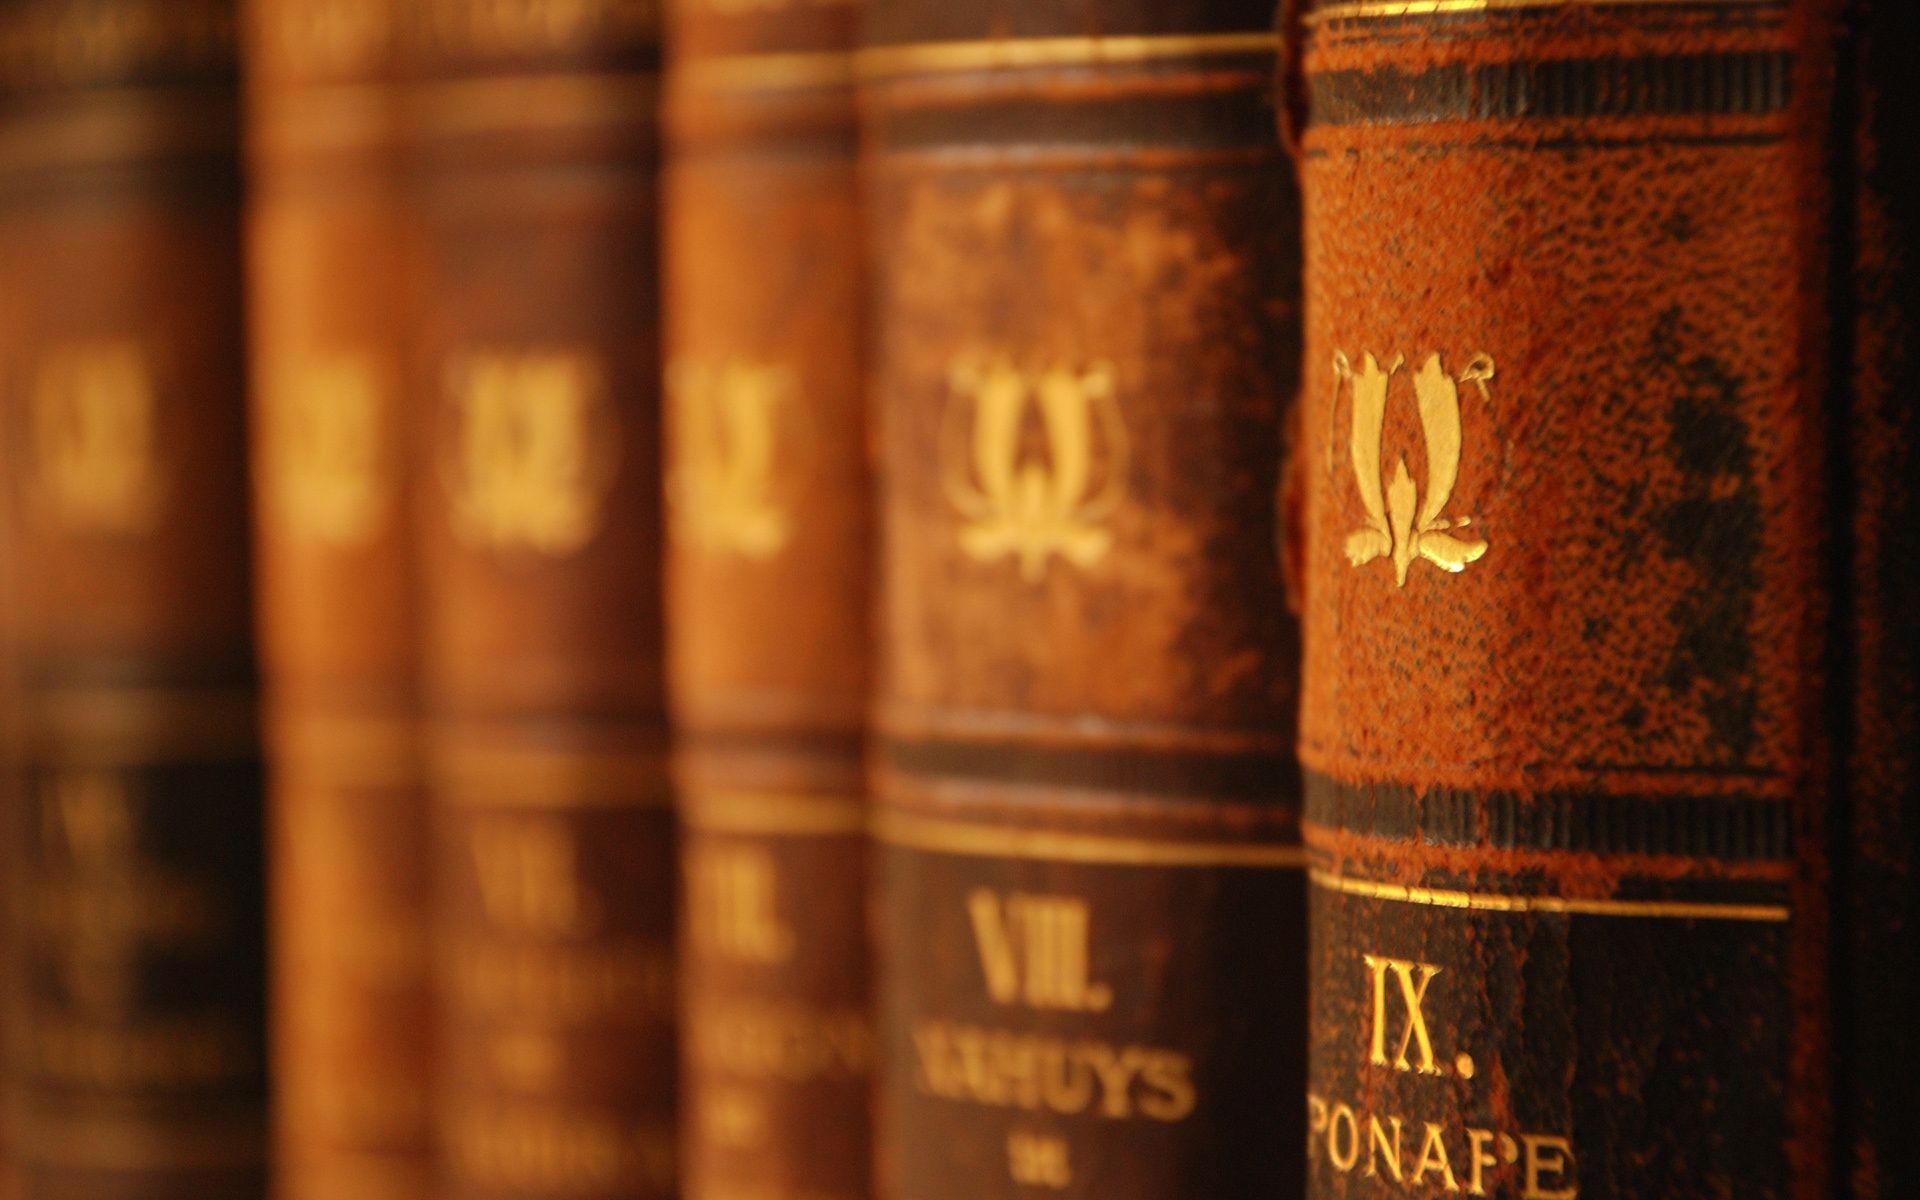 old books wide HD wallpaper download old book image free